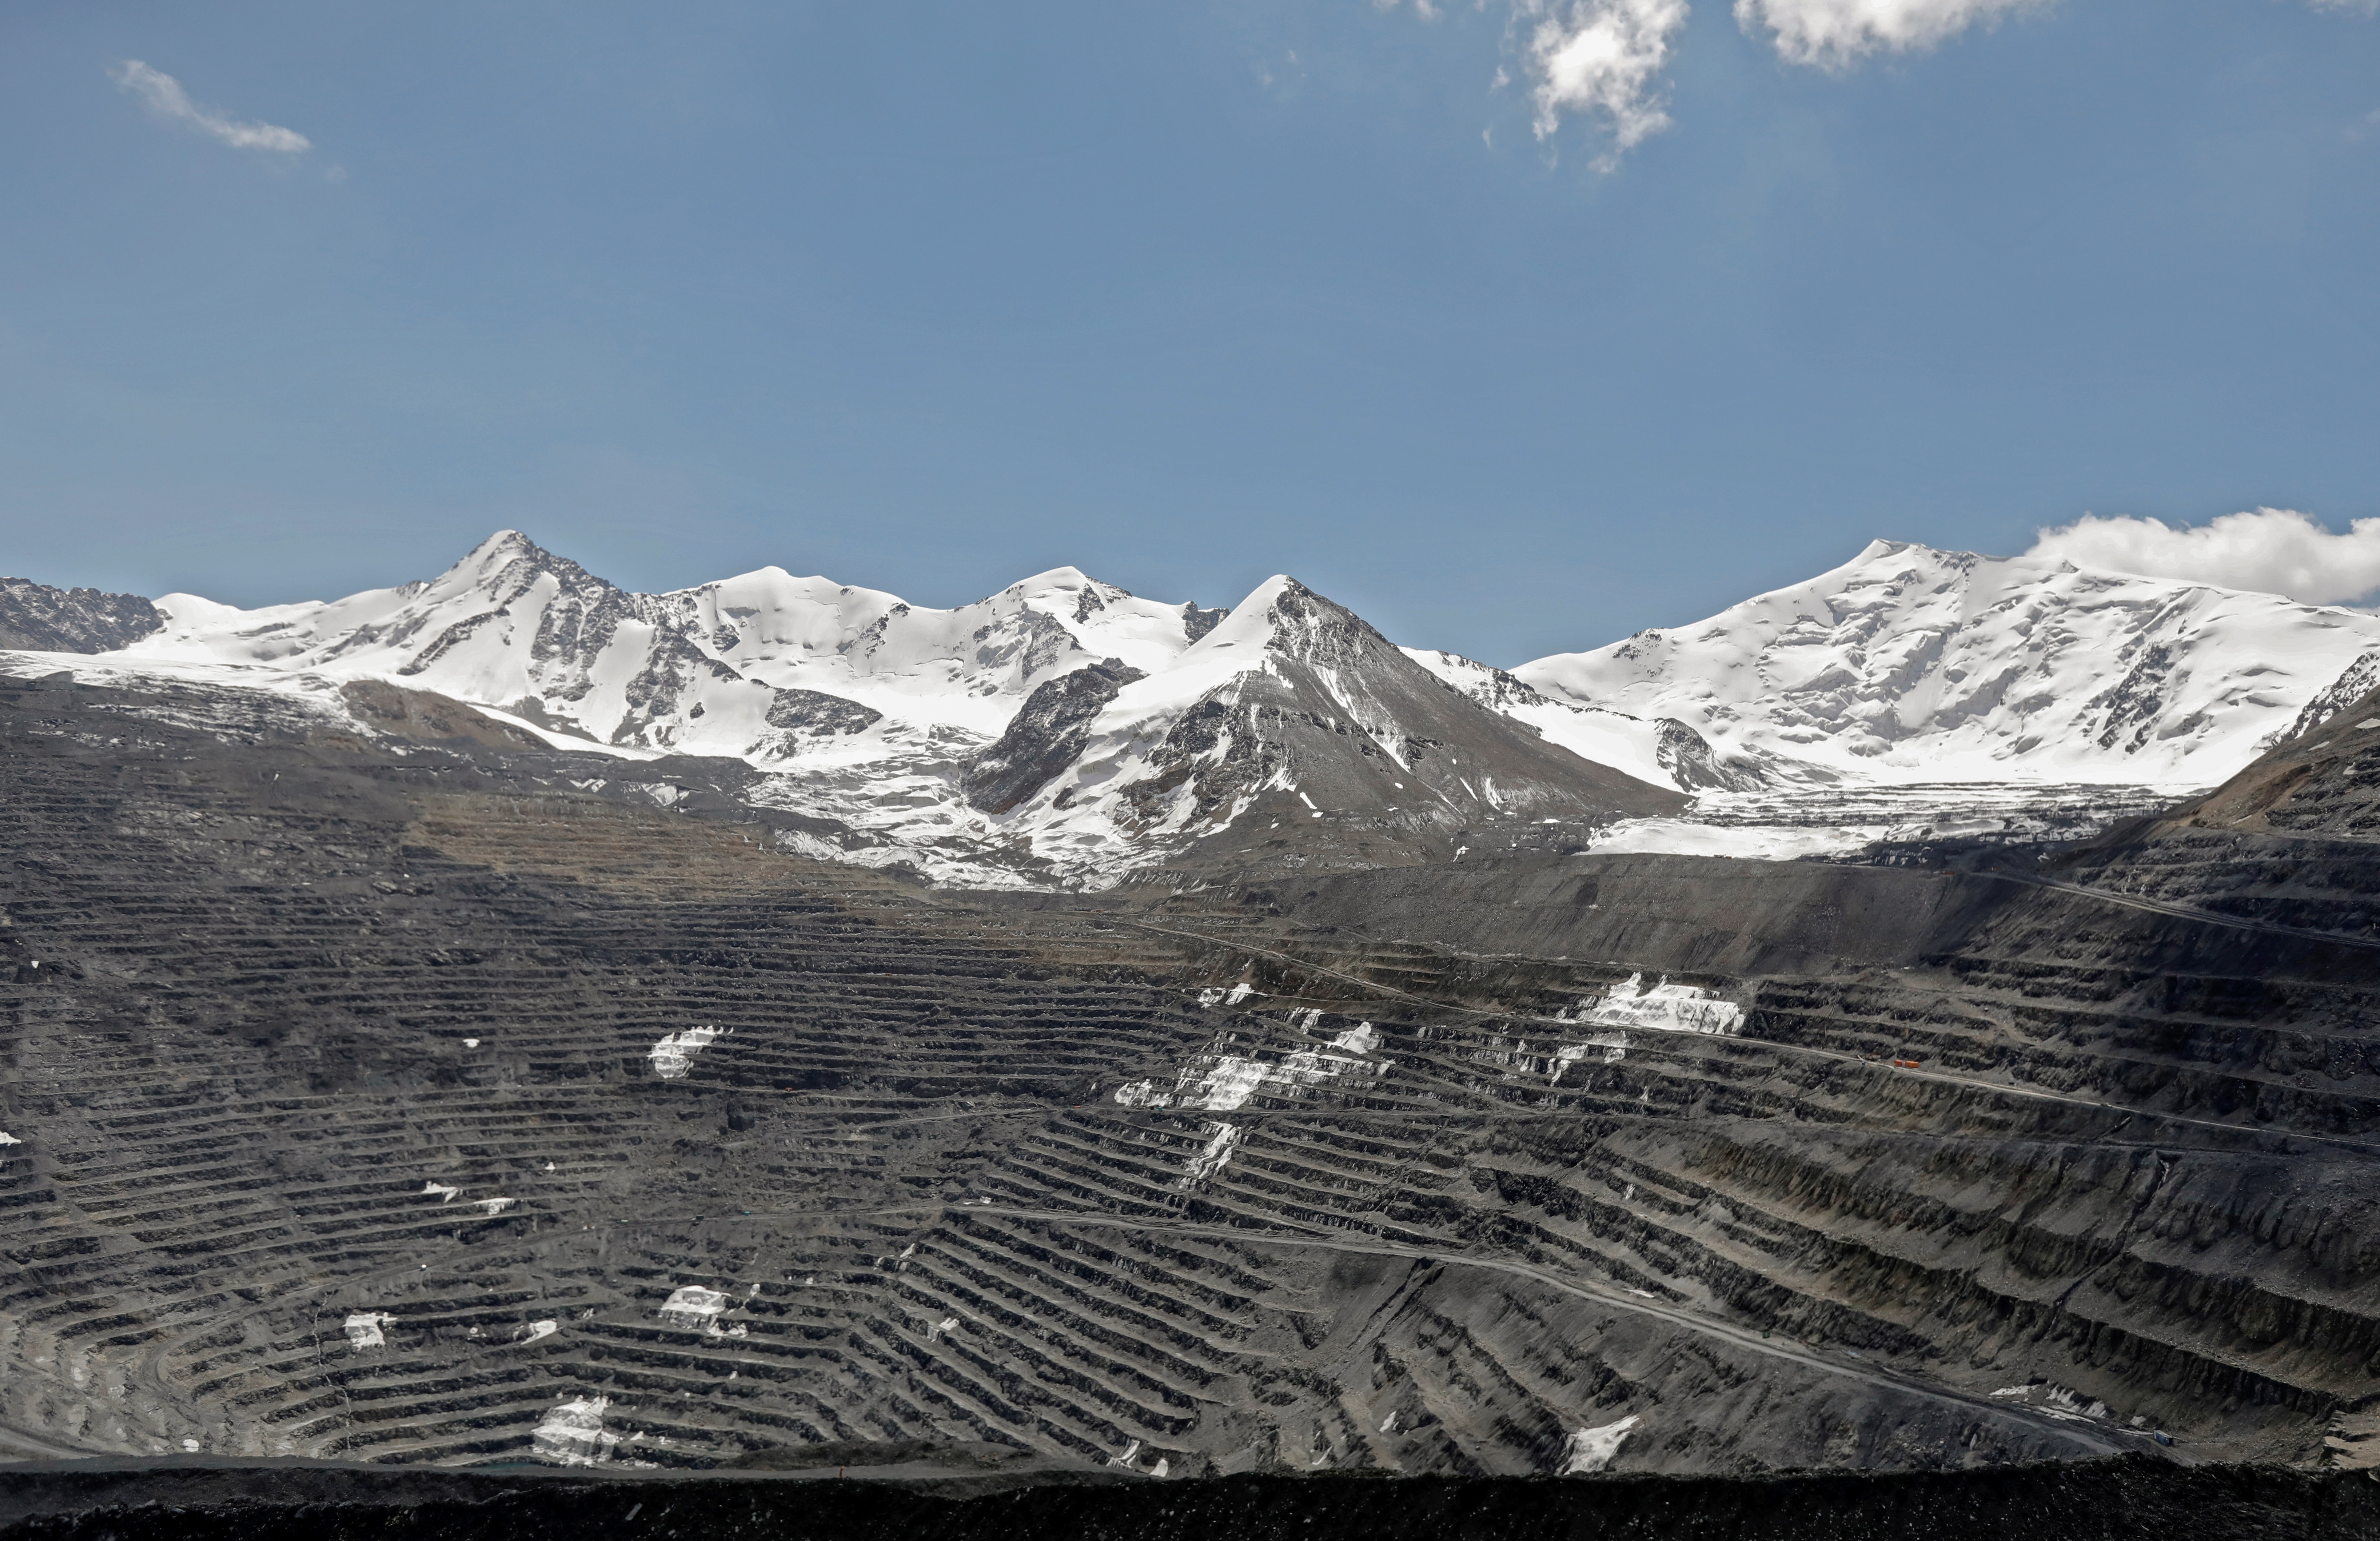 A general view shows the Kumtor open pit gold mine at an altitude of about 4,000 meters above sea level in the Tien Shan mountains, Kyrgyzstan, May 28, 2021. REUTERS/Vladimir Pirogov